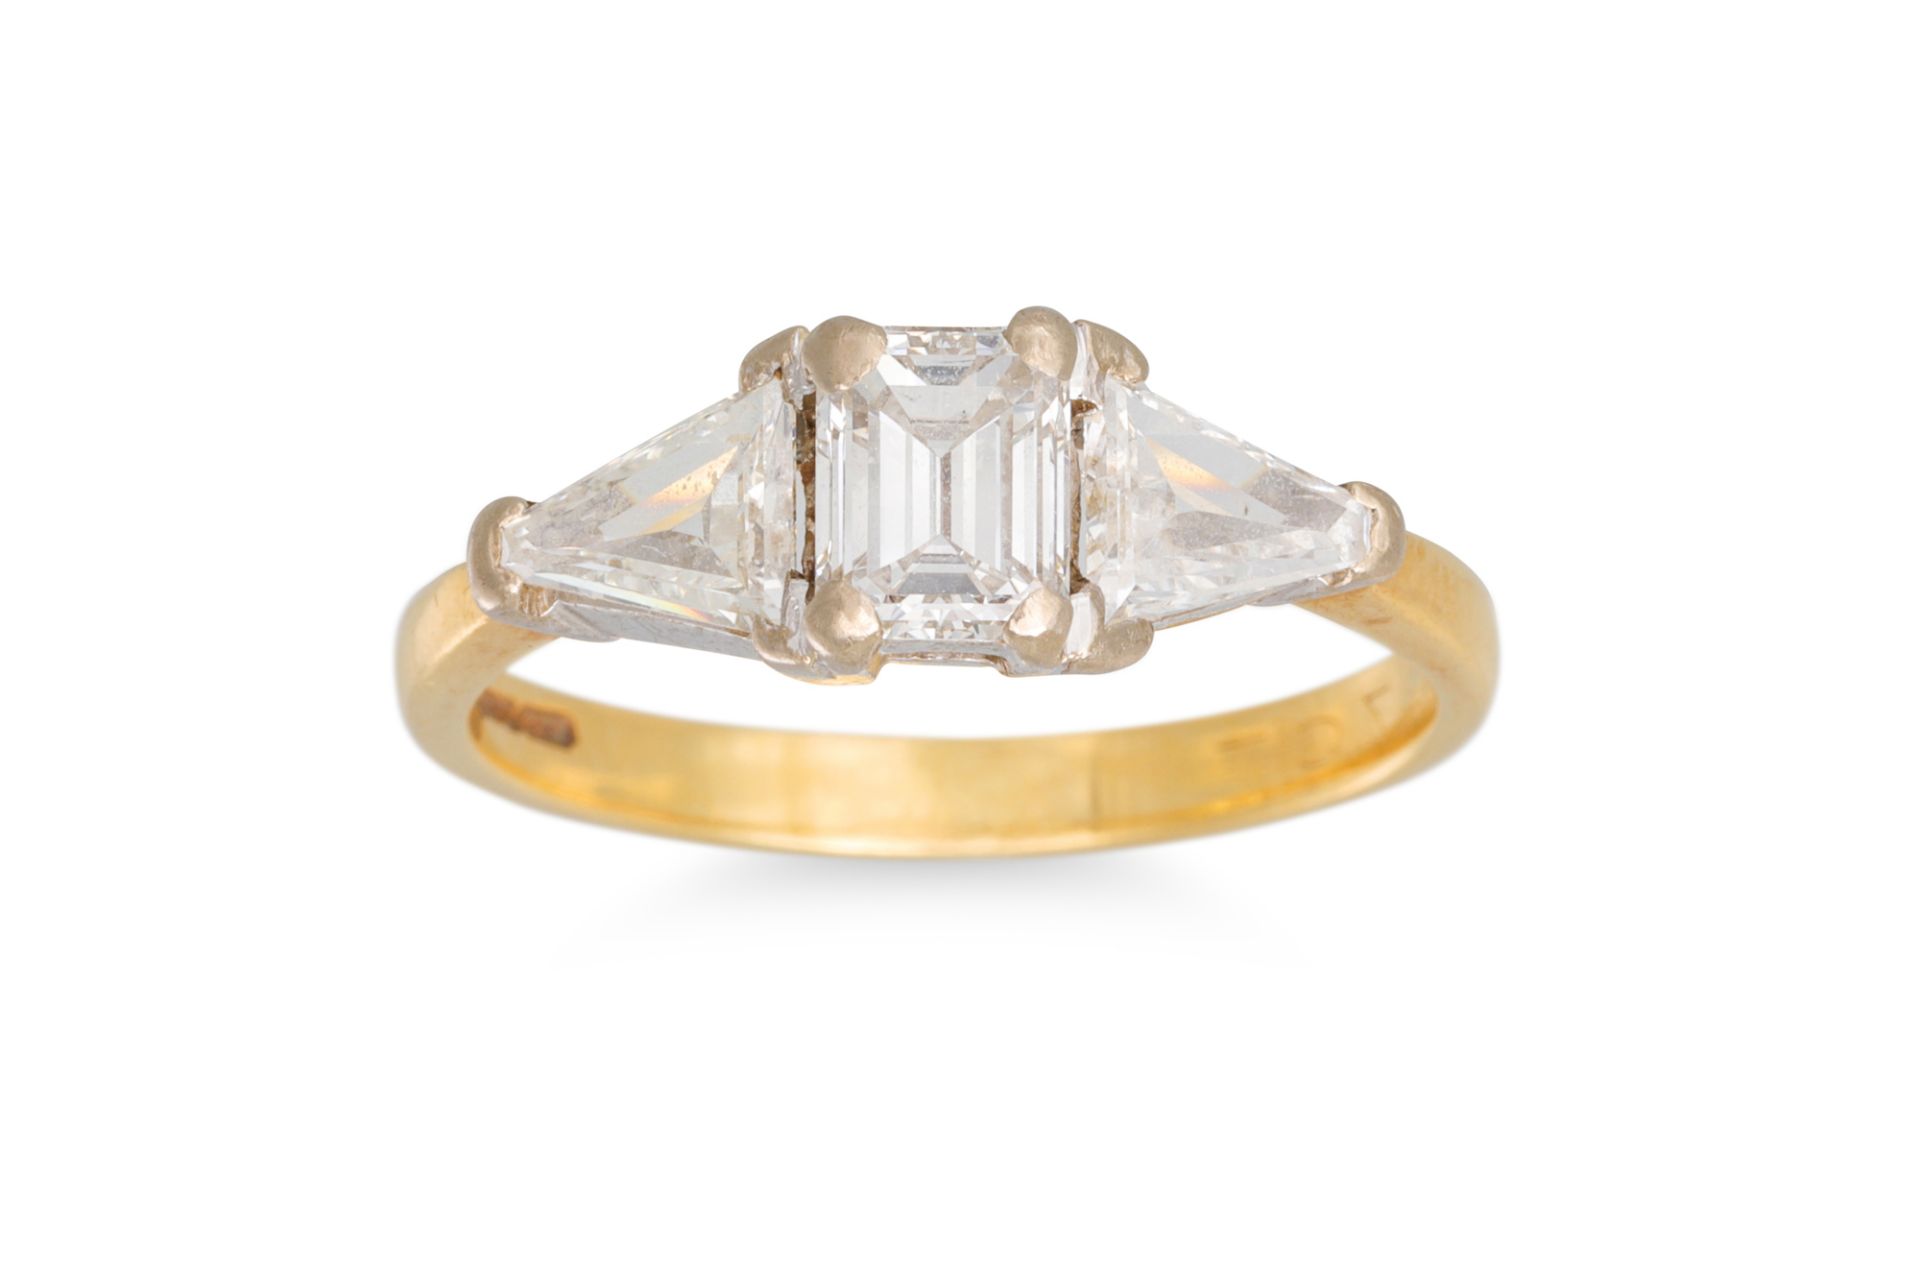 AN EMERALD CUT DIAMOND RING, with trillion shoulders, mounted in yellow gold. Estimated: weight of